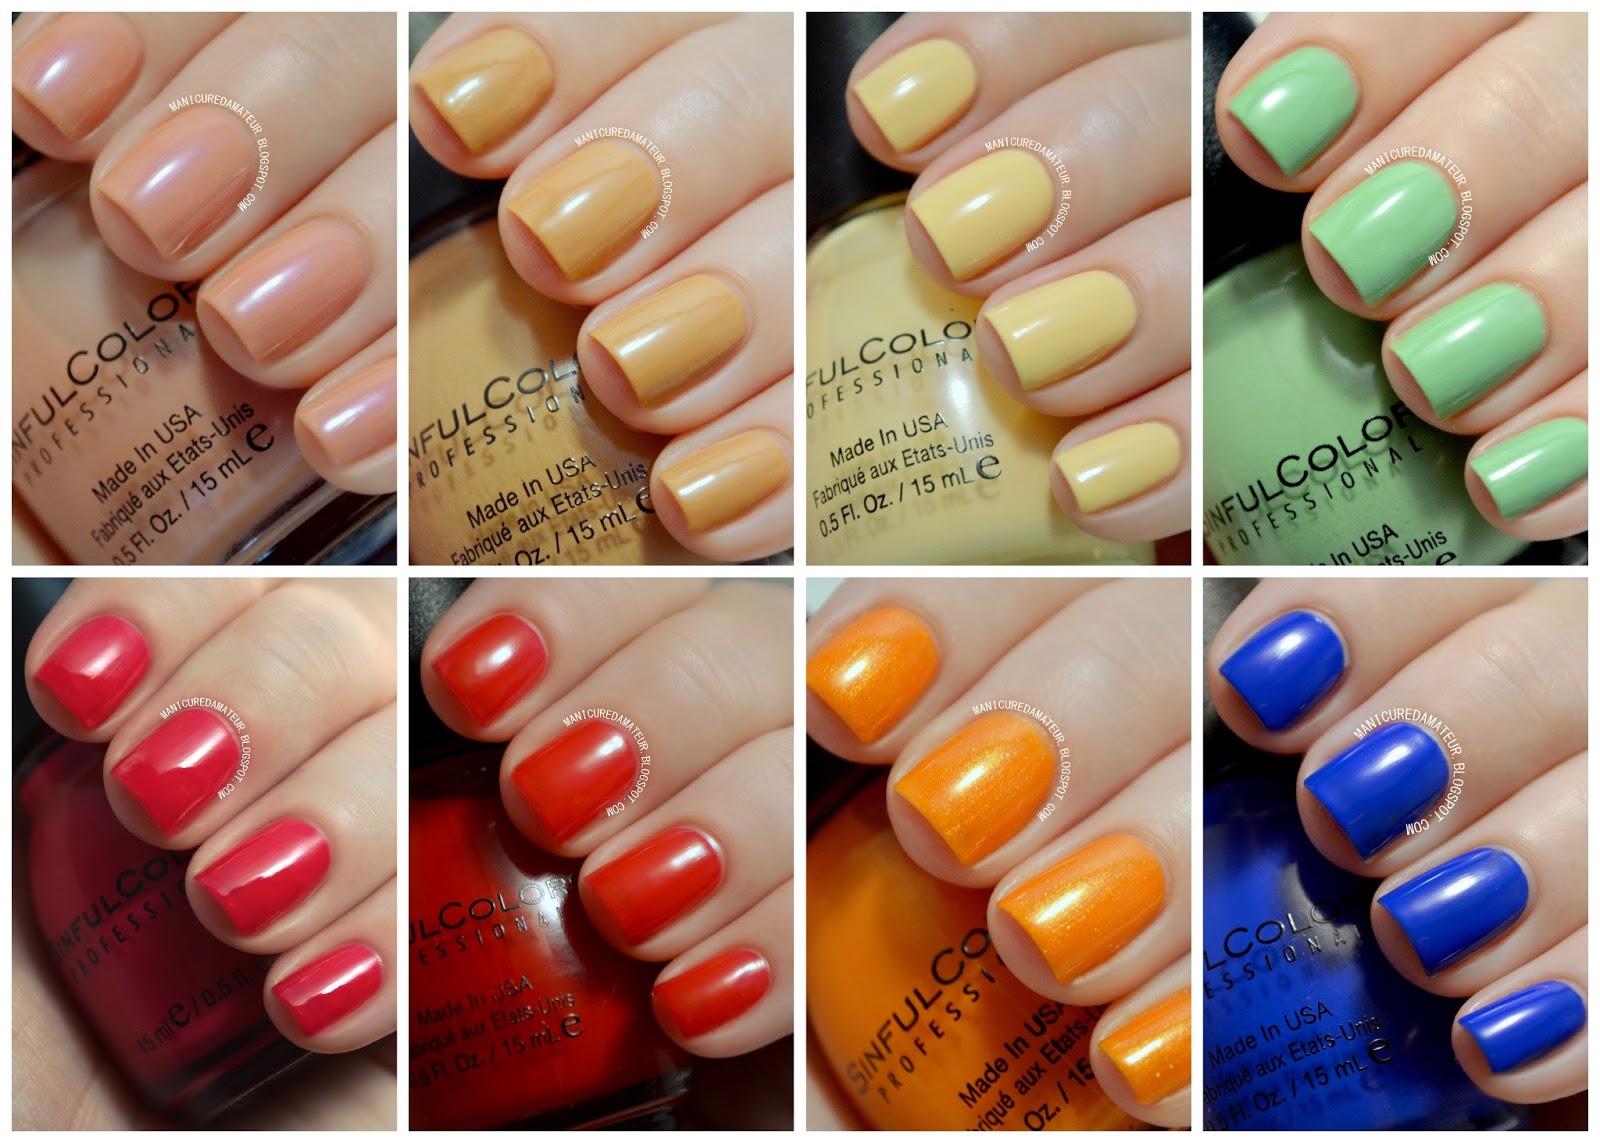 9. Sinful Colors Professional Nail Polish in "Gogo Girl" - wide 10